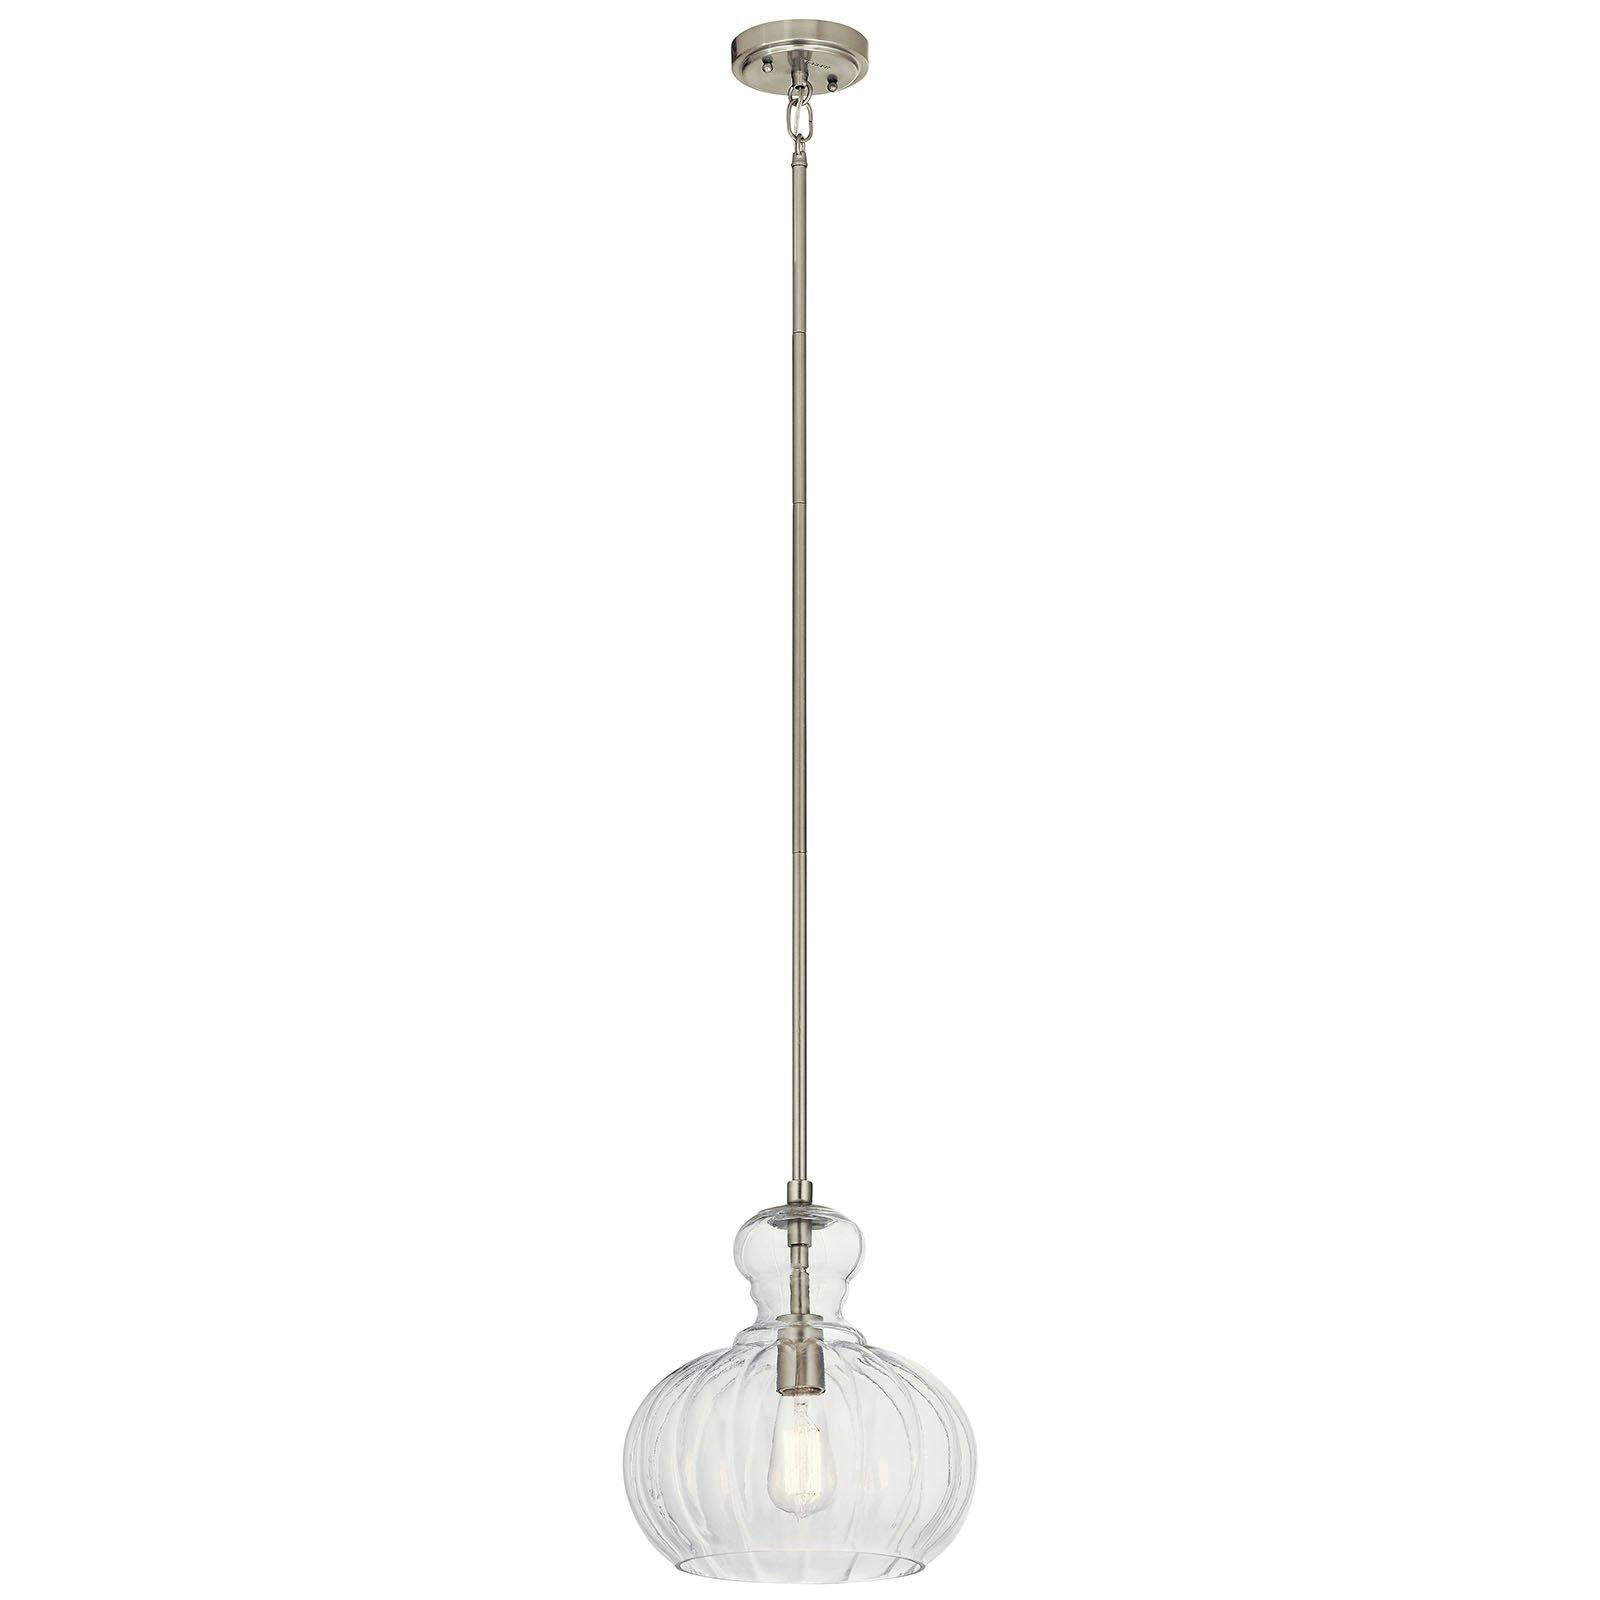 Riviera 13" 1 Light Pendant in Nickel on a white background